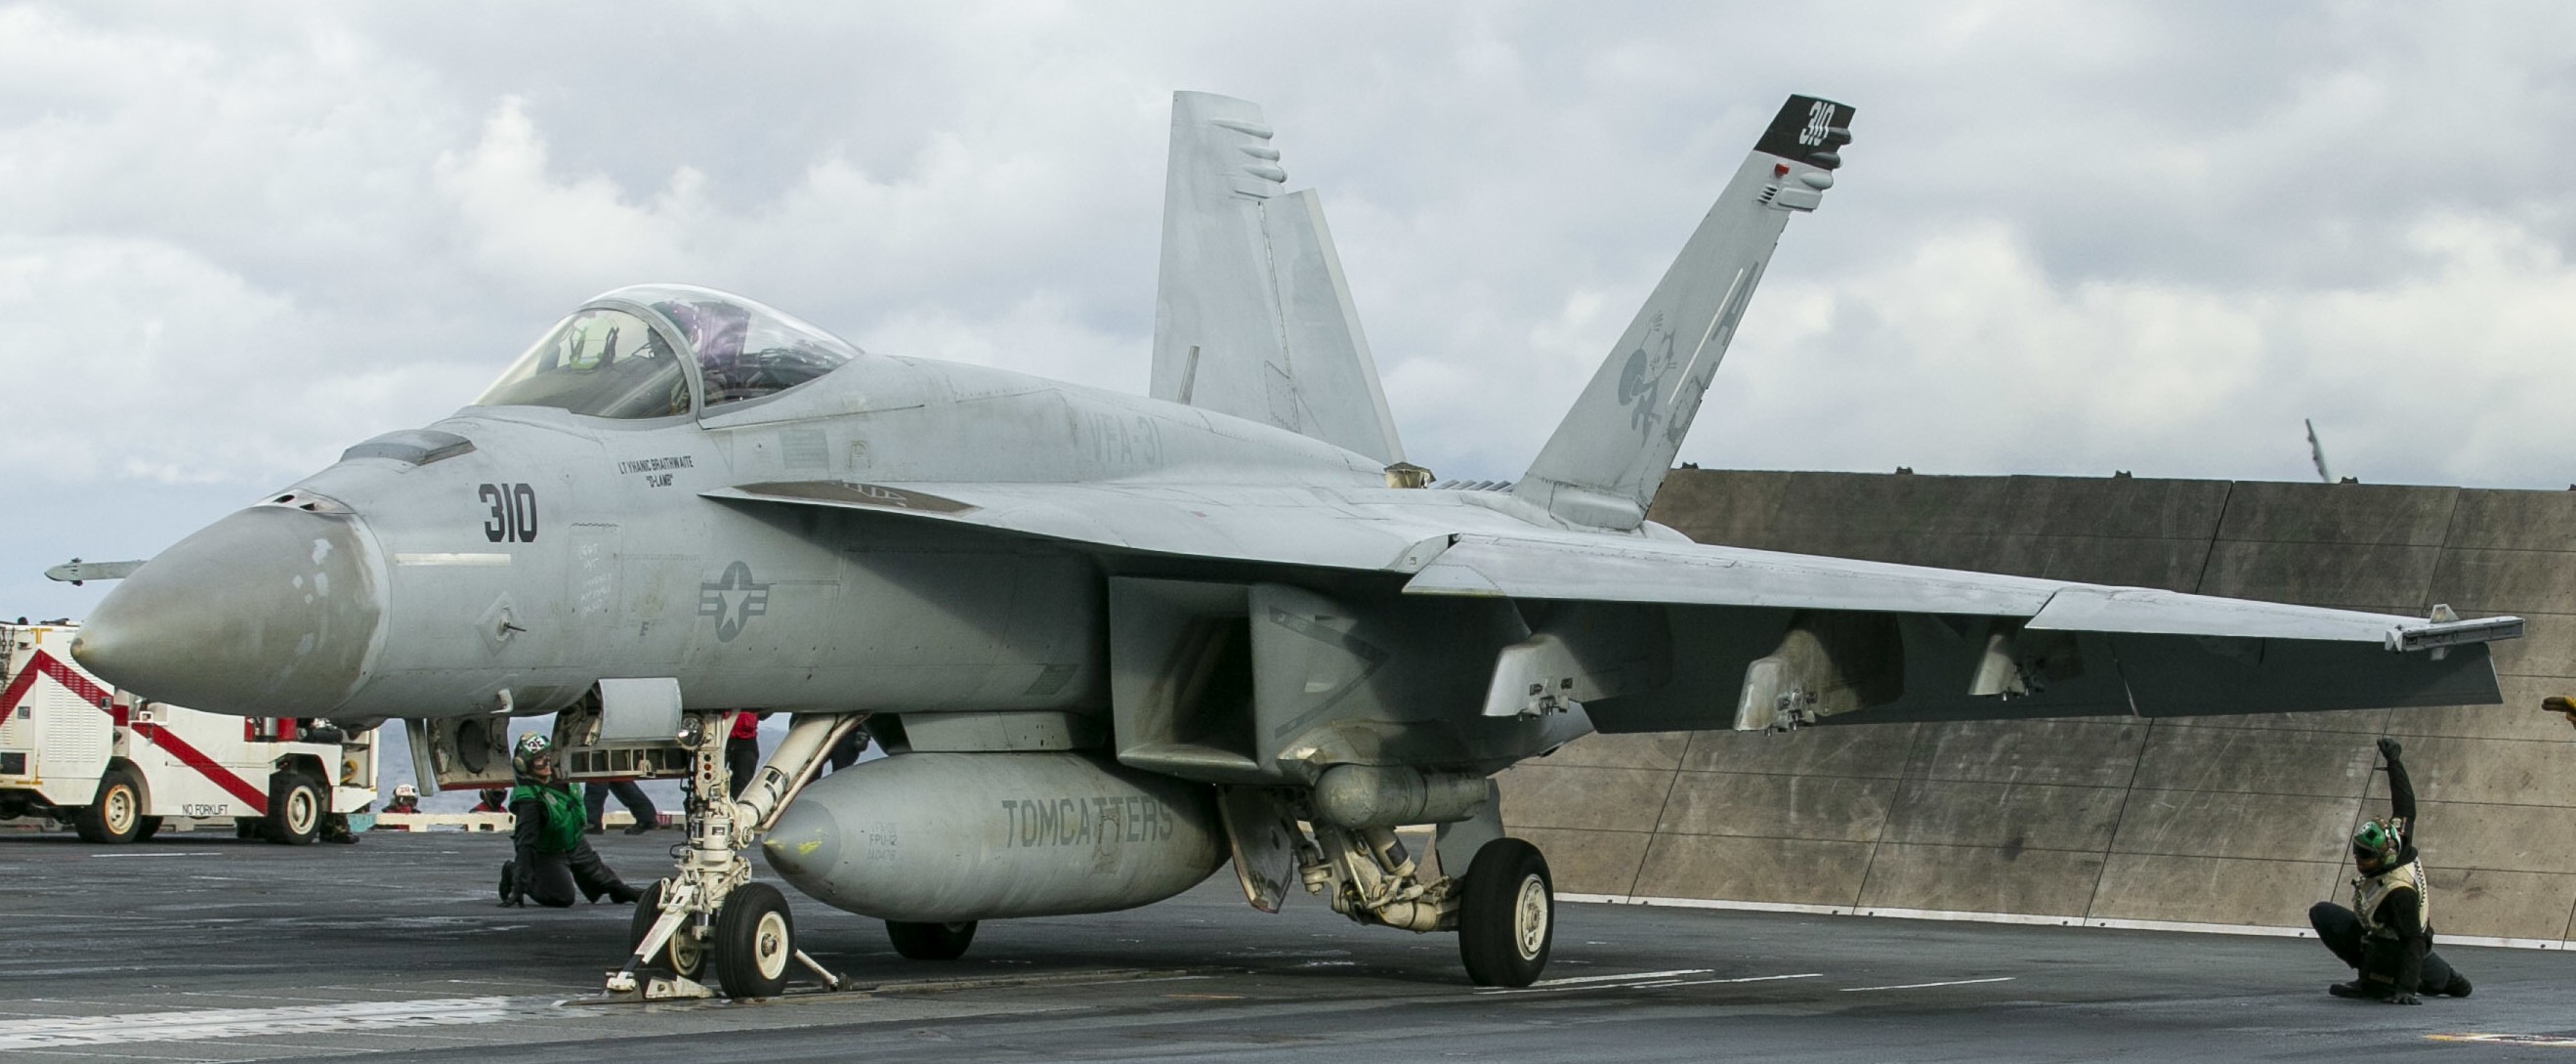 vfa-31 tomcatters strike fighter squadron f/a-18e super hornet us navy cvn-78 uss gerald r. ford cvw-8 104